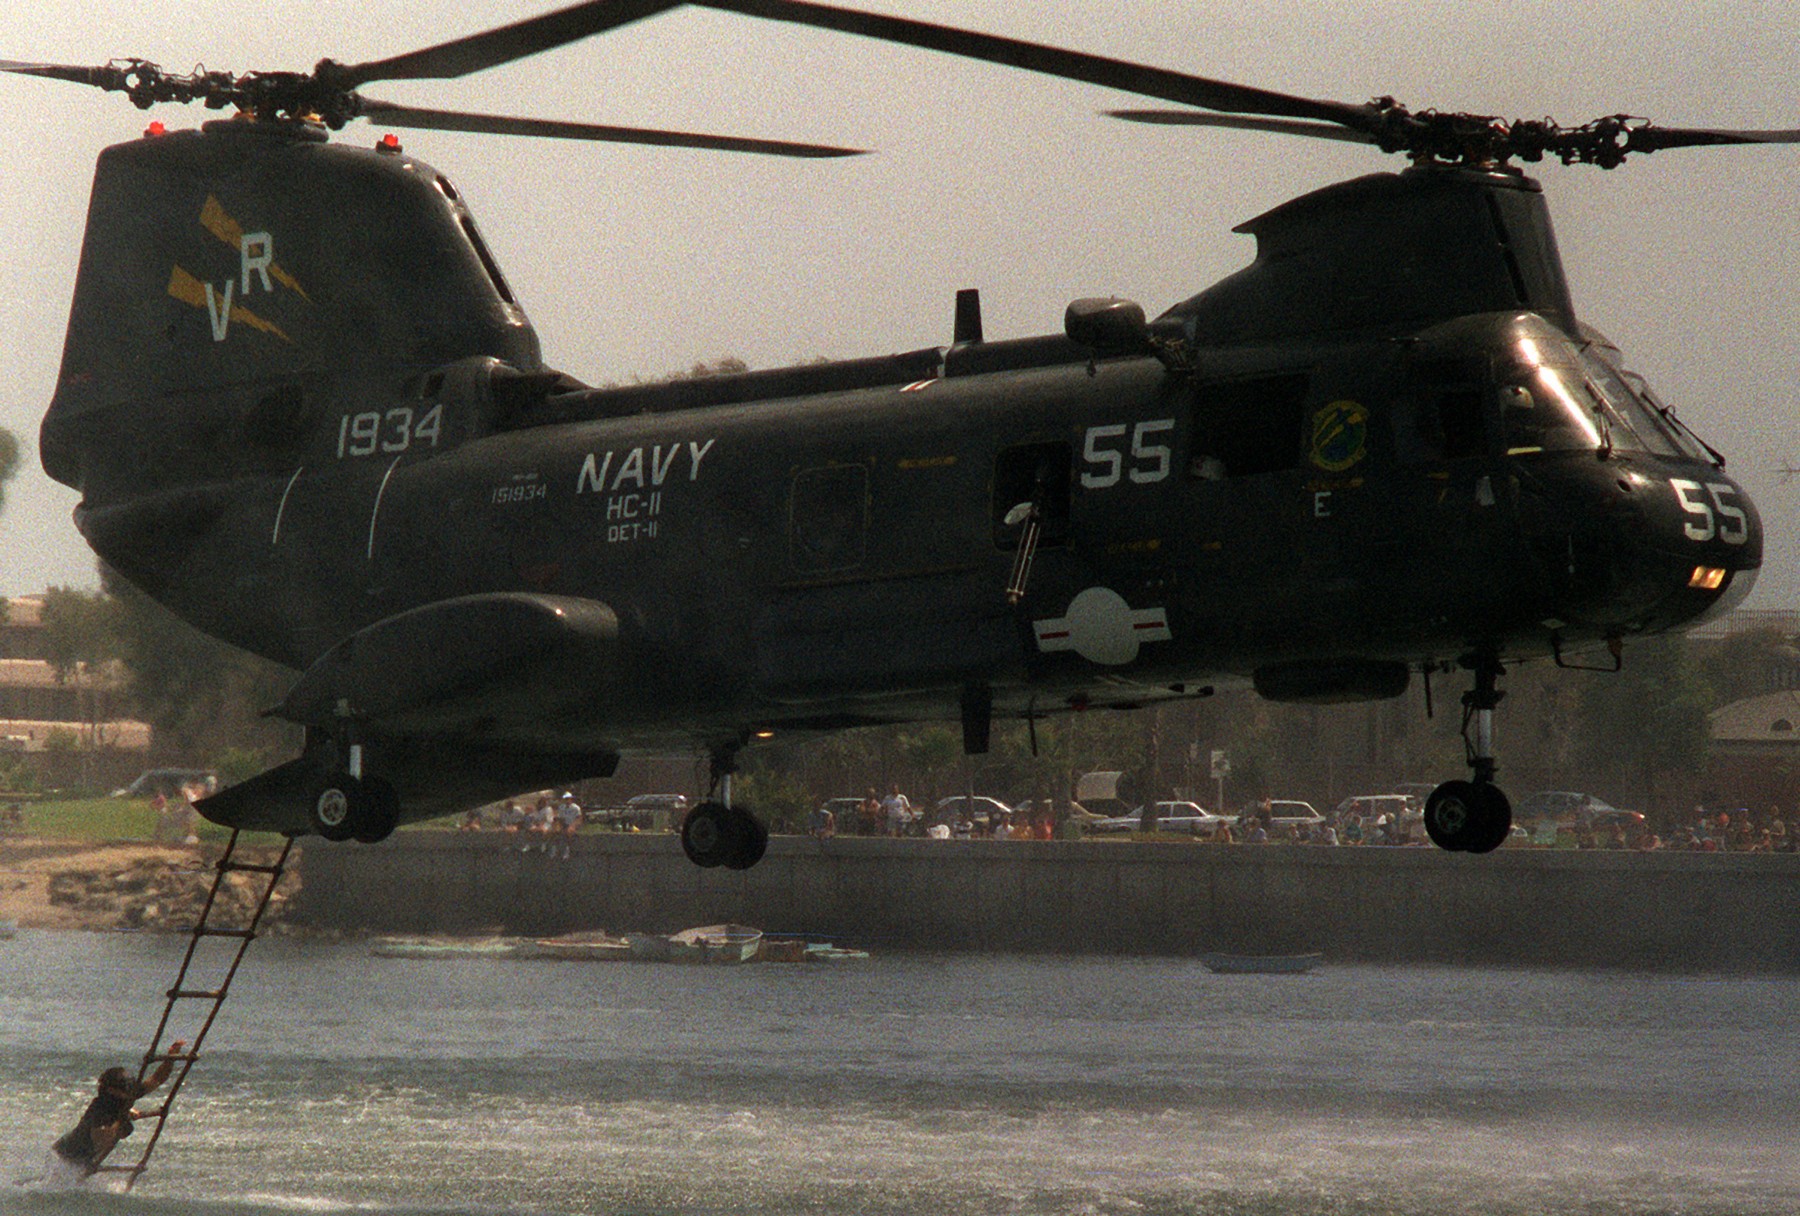 hc-11 gunbearers helicopter combat support squadron navy ch-46 sea knight 103